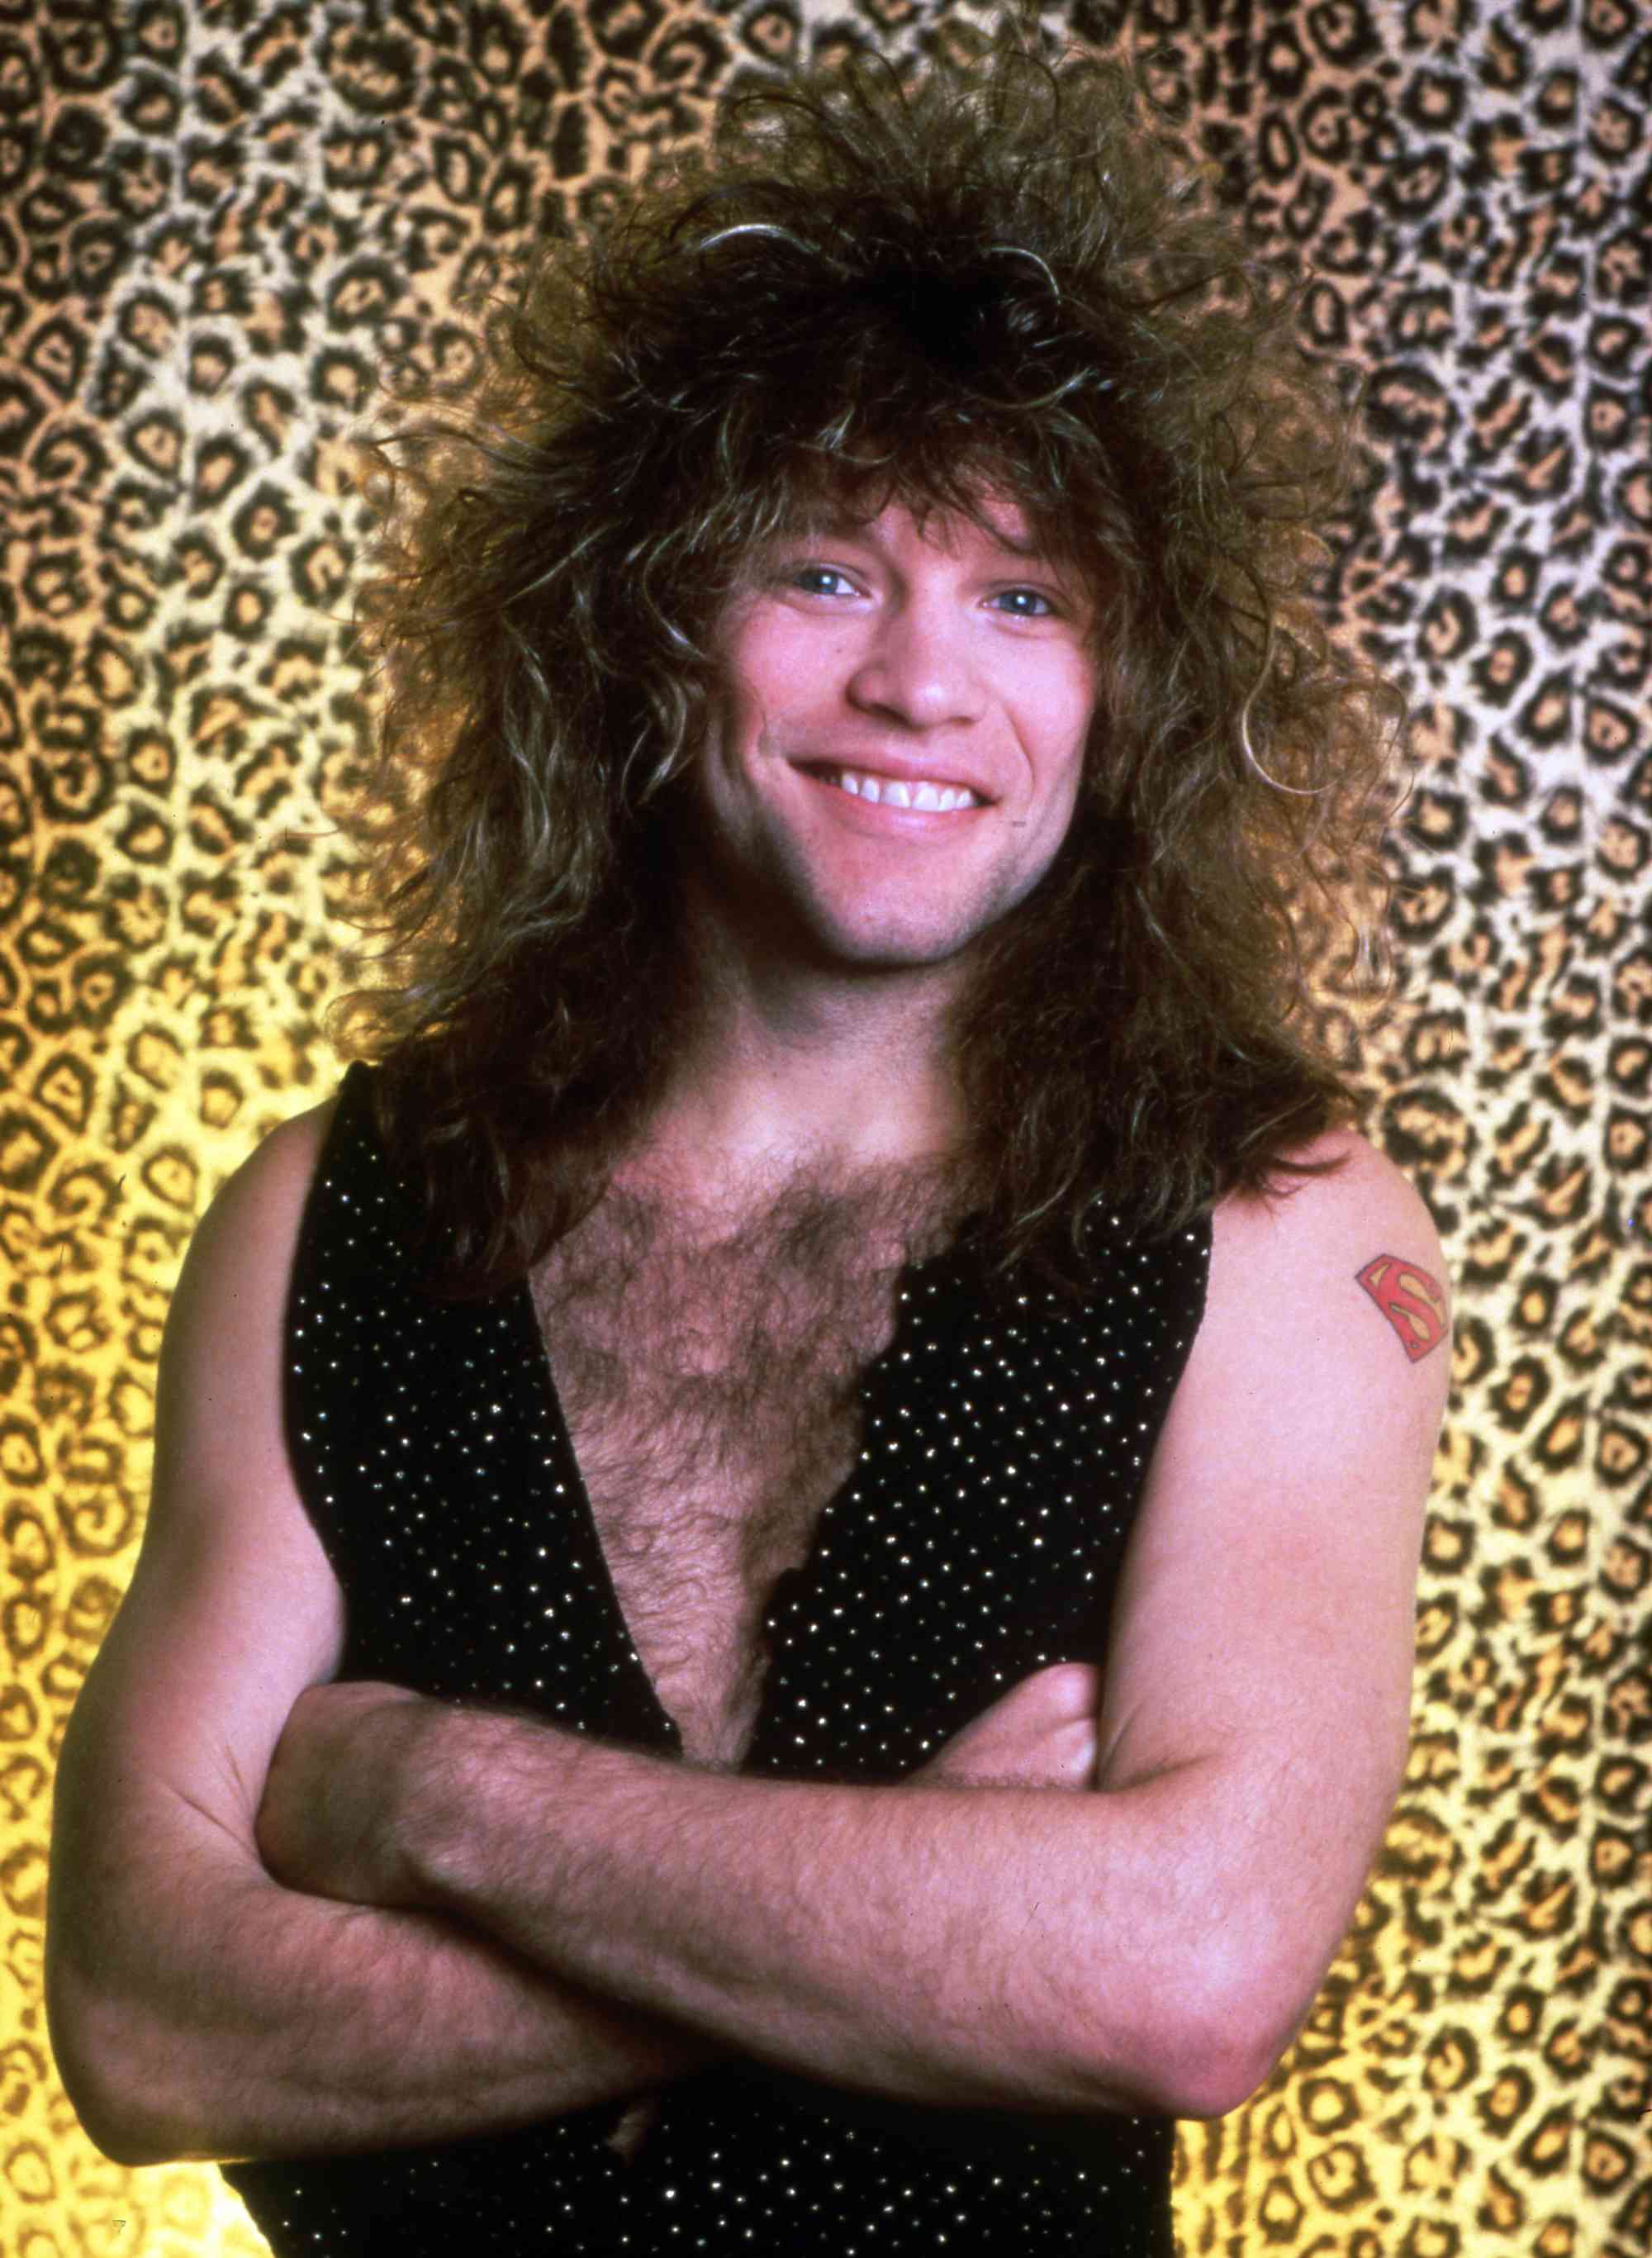 American singer-songwriter, Jon Bon Jovi, who is the founder and frontman of the rock band Bon Jovi, poses during a portrait session before their concert at the Joe Louis Arena, during their Slippery When Wet tour, in Detroit, MI, May 26, 1987.